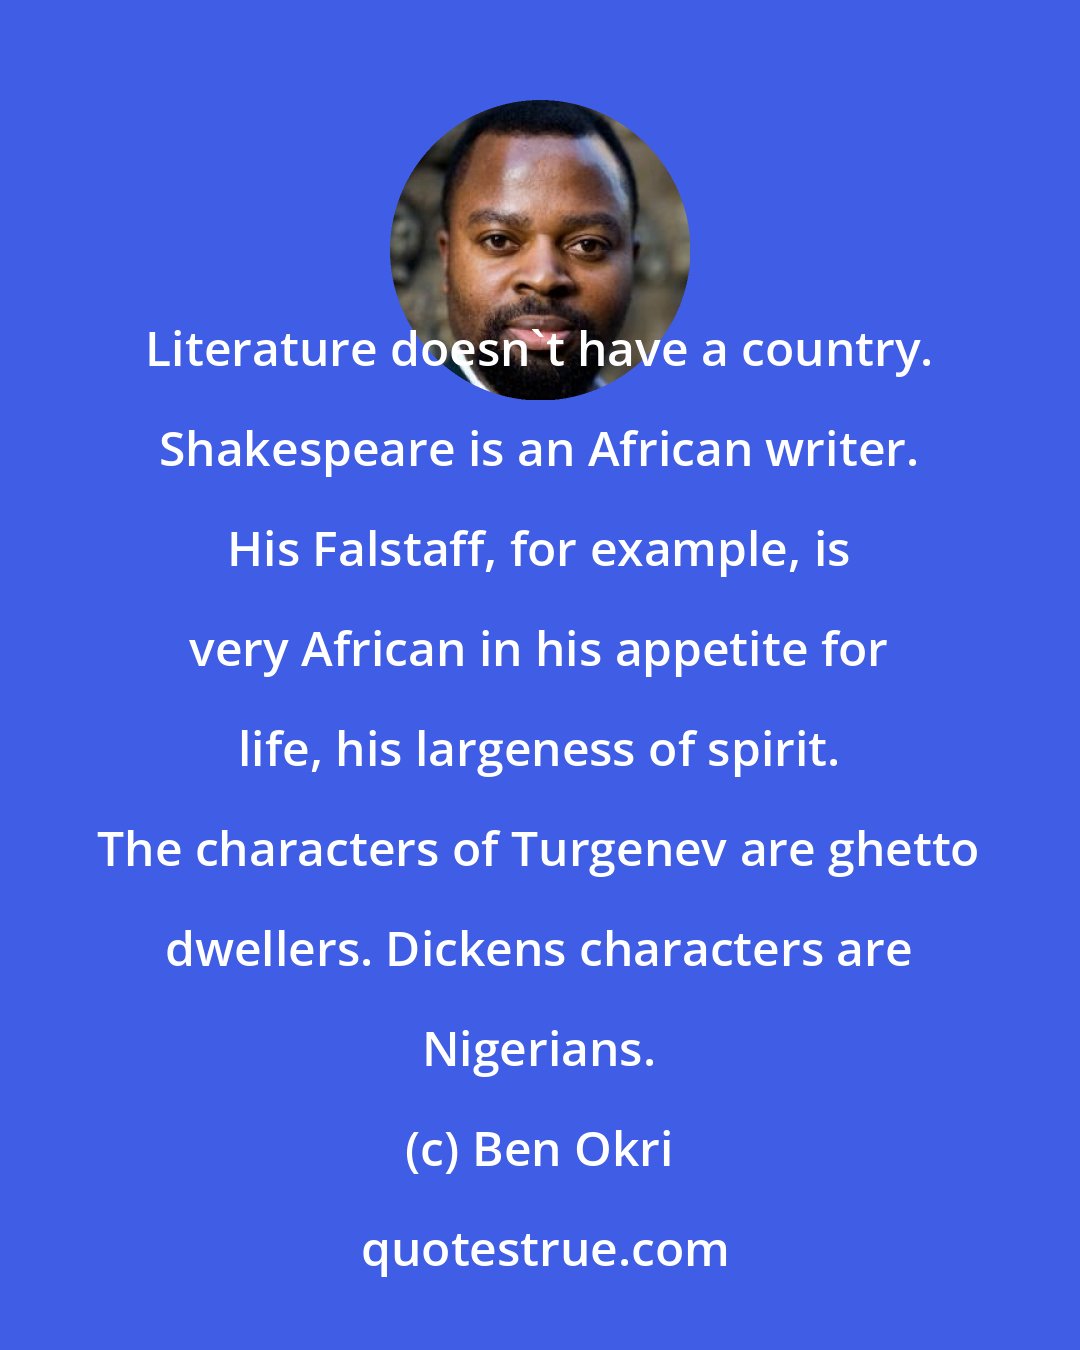 Ben Okri: Literature doesn't have a country. Shakespeare is an African writer. His Falstaff, for example, is very African in his appetite for life, his largeness of spirit. The characters of Turgenev are ghetto dwellers. Dickens characters are Nigerians.